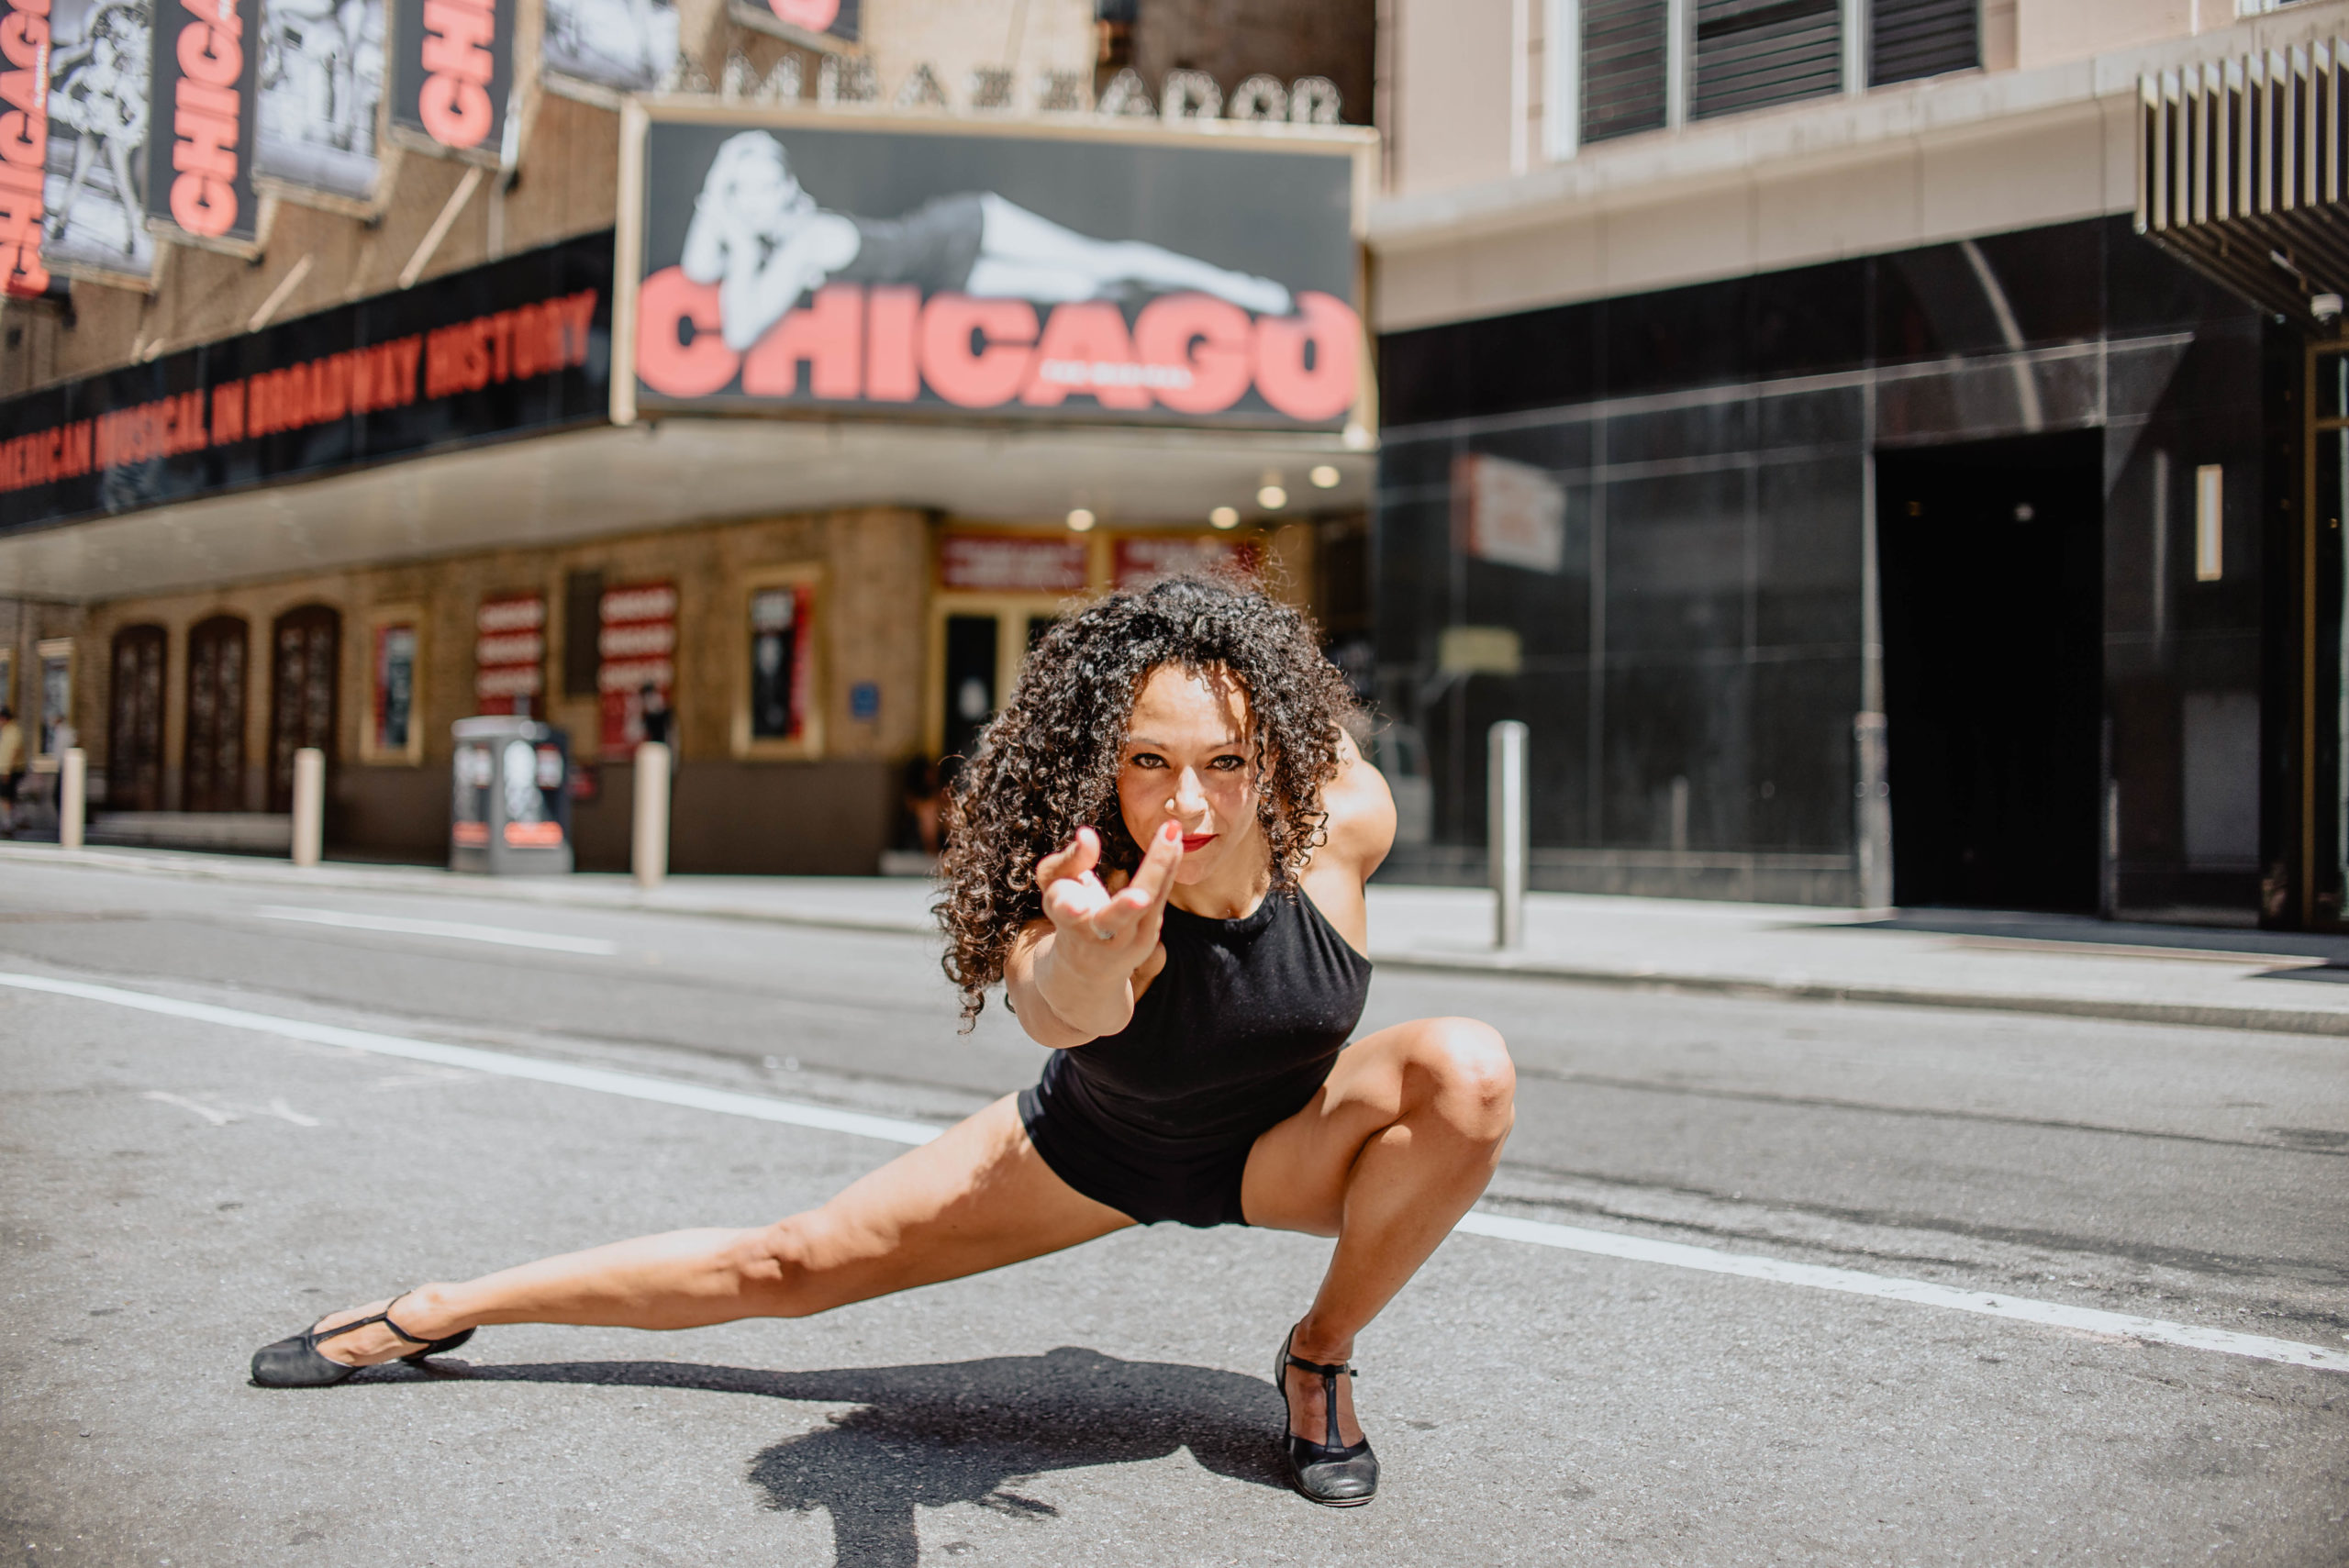 Arian Keddell poses on the street in front of the Chicago theater on Broadway. With one leg extended to the side and one leg bent under her, she hovers close to the ground, reaching one arm forward.